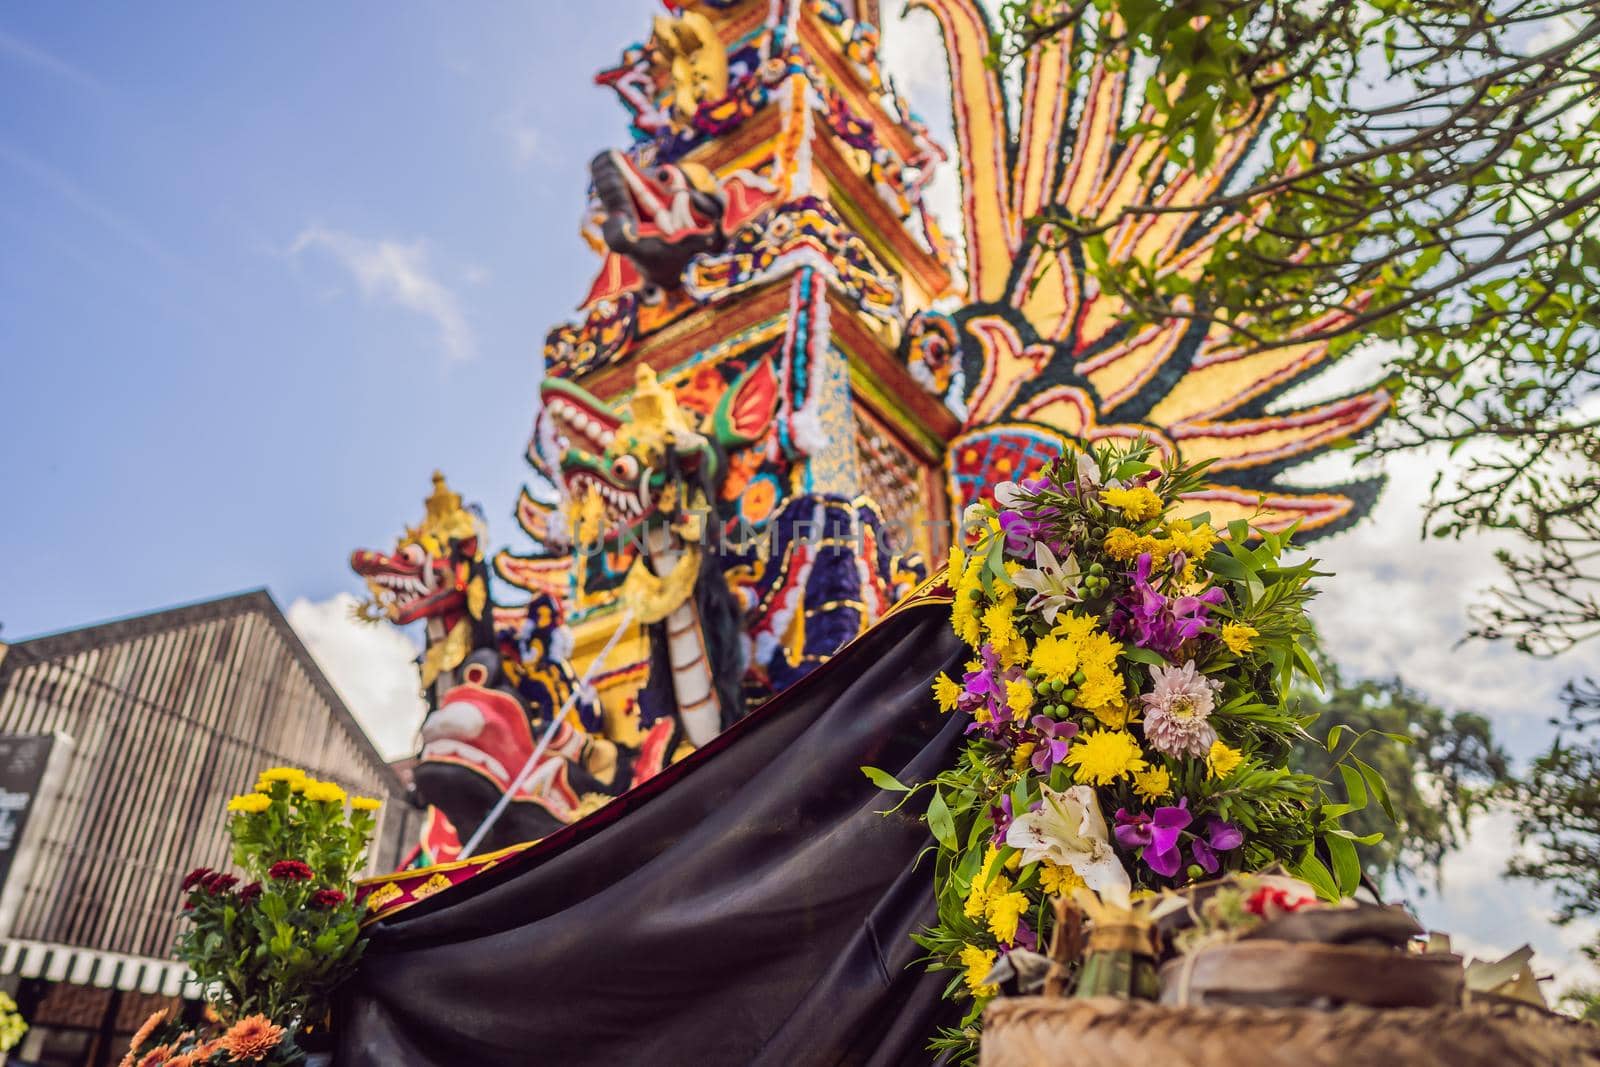 Bade cremation tower with traditional balinese sculptures of demons and flowers on central street in Ubud, Island Bali, Indonesia . Prepared for an upcoming cremation ceremony.